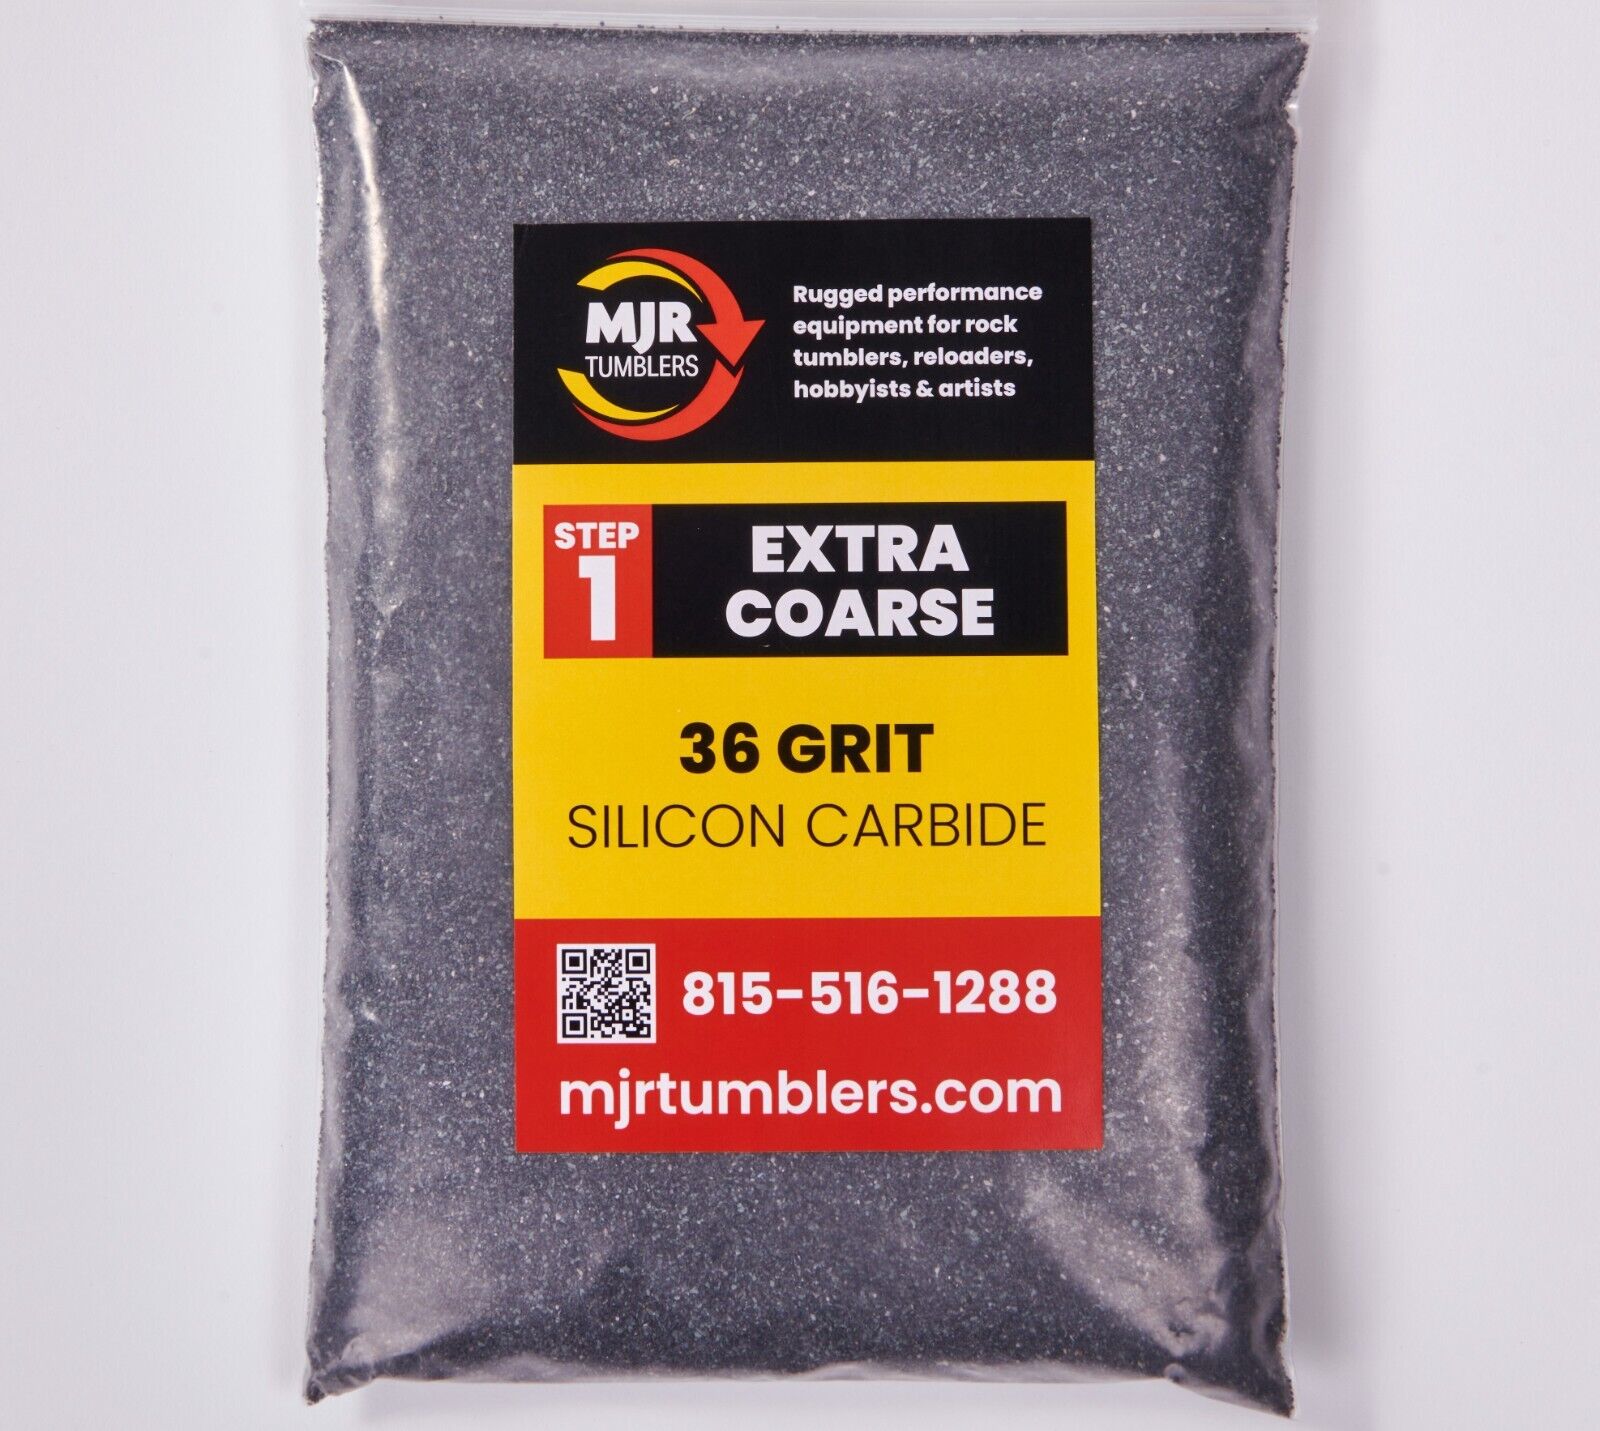 5 lb of 36 Grit Extra Coarse Rock Tumbling Silicon Carbide for Lapidary Polish